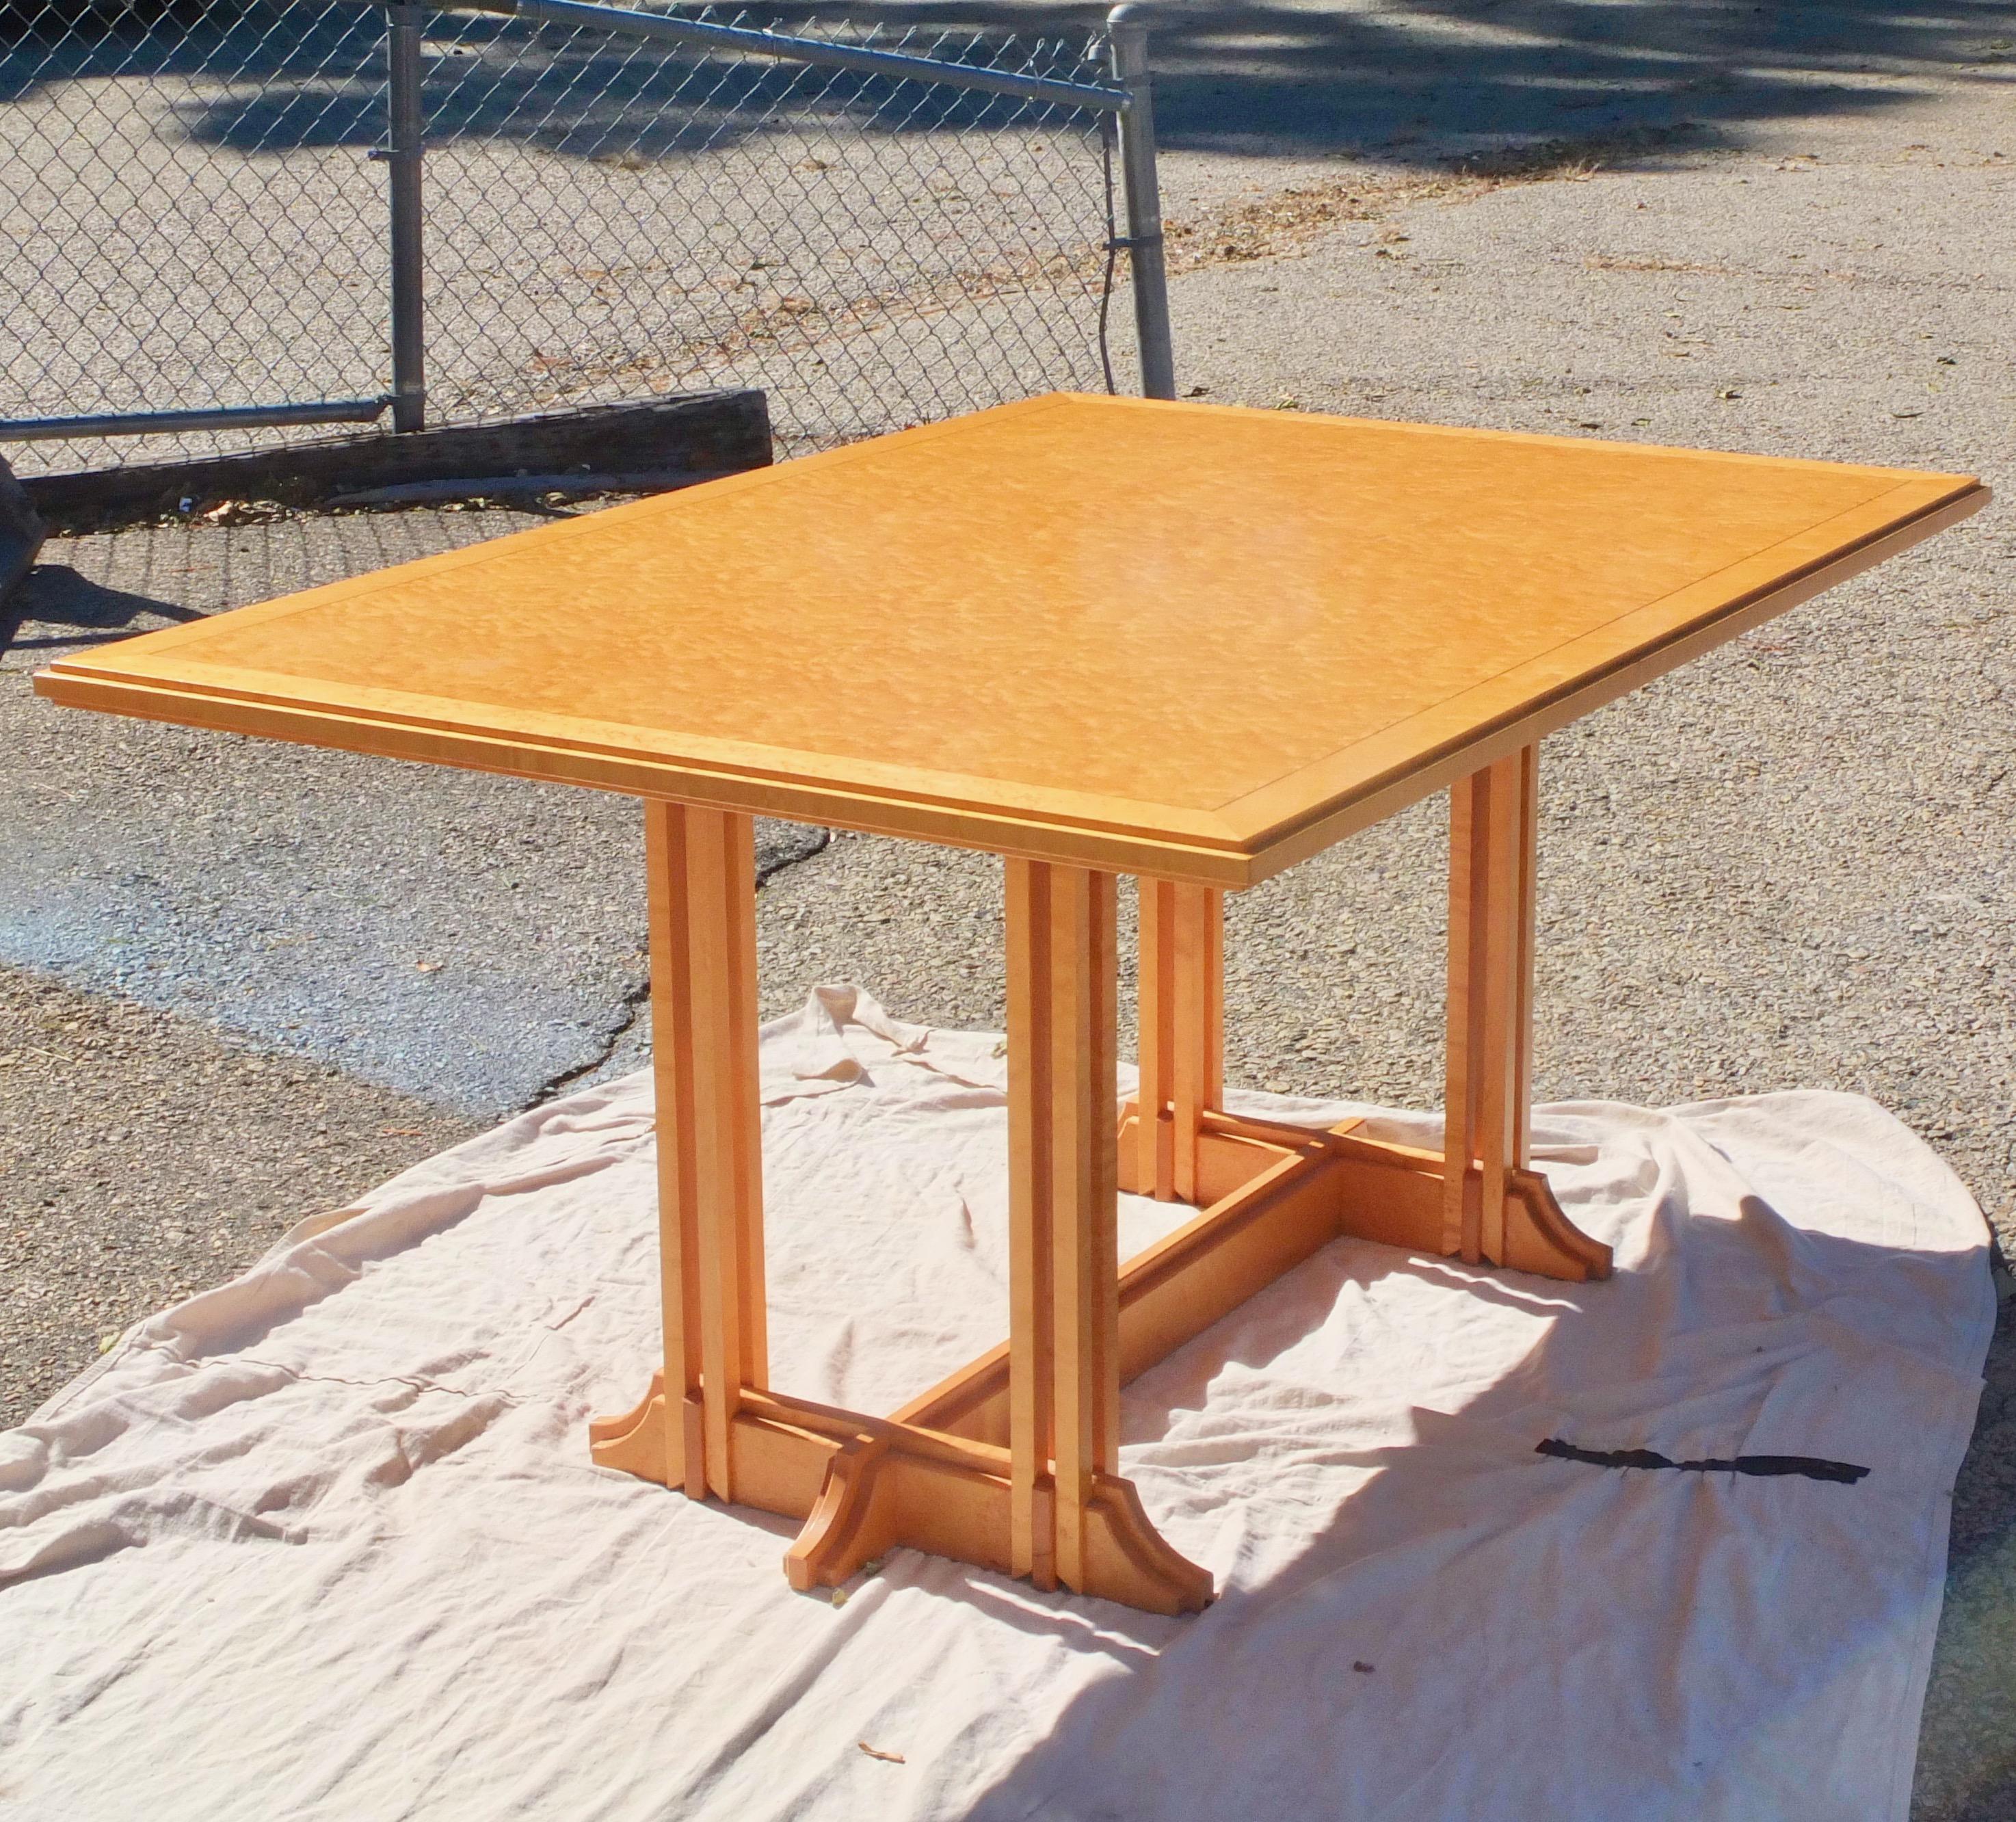 Quilted maple hardwood dining table created in 1987 by studio furniture maker Gregg Lipton for his parents, so an extra special amount of love went into this! 